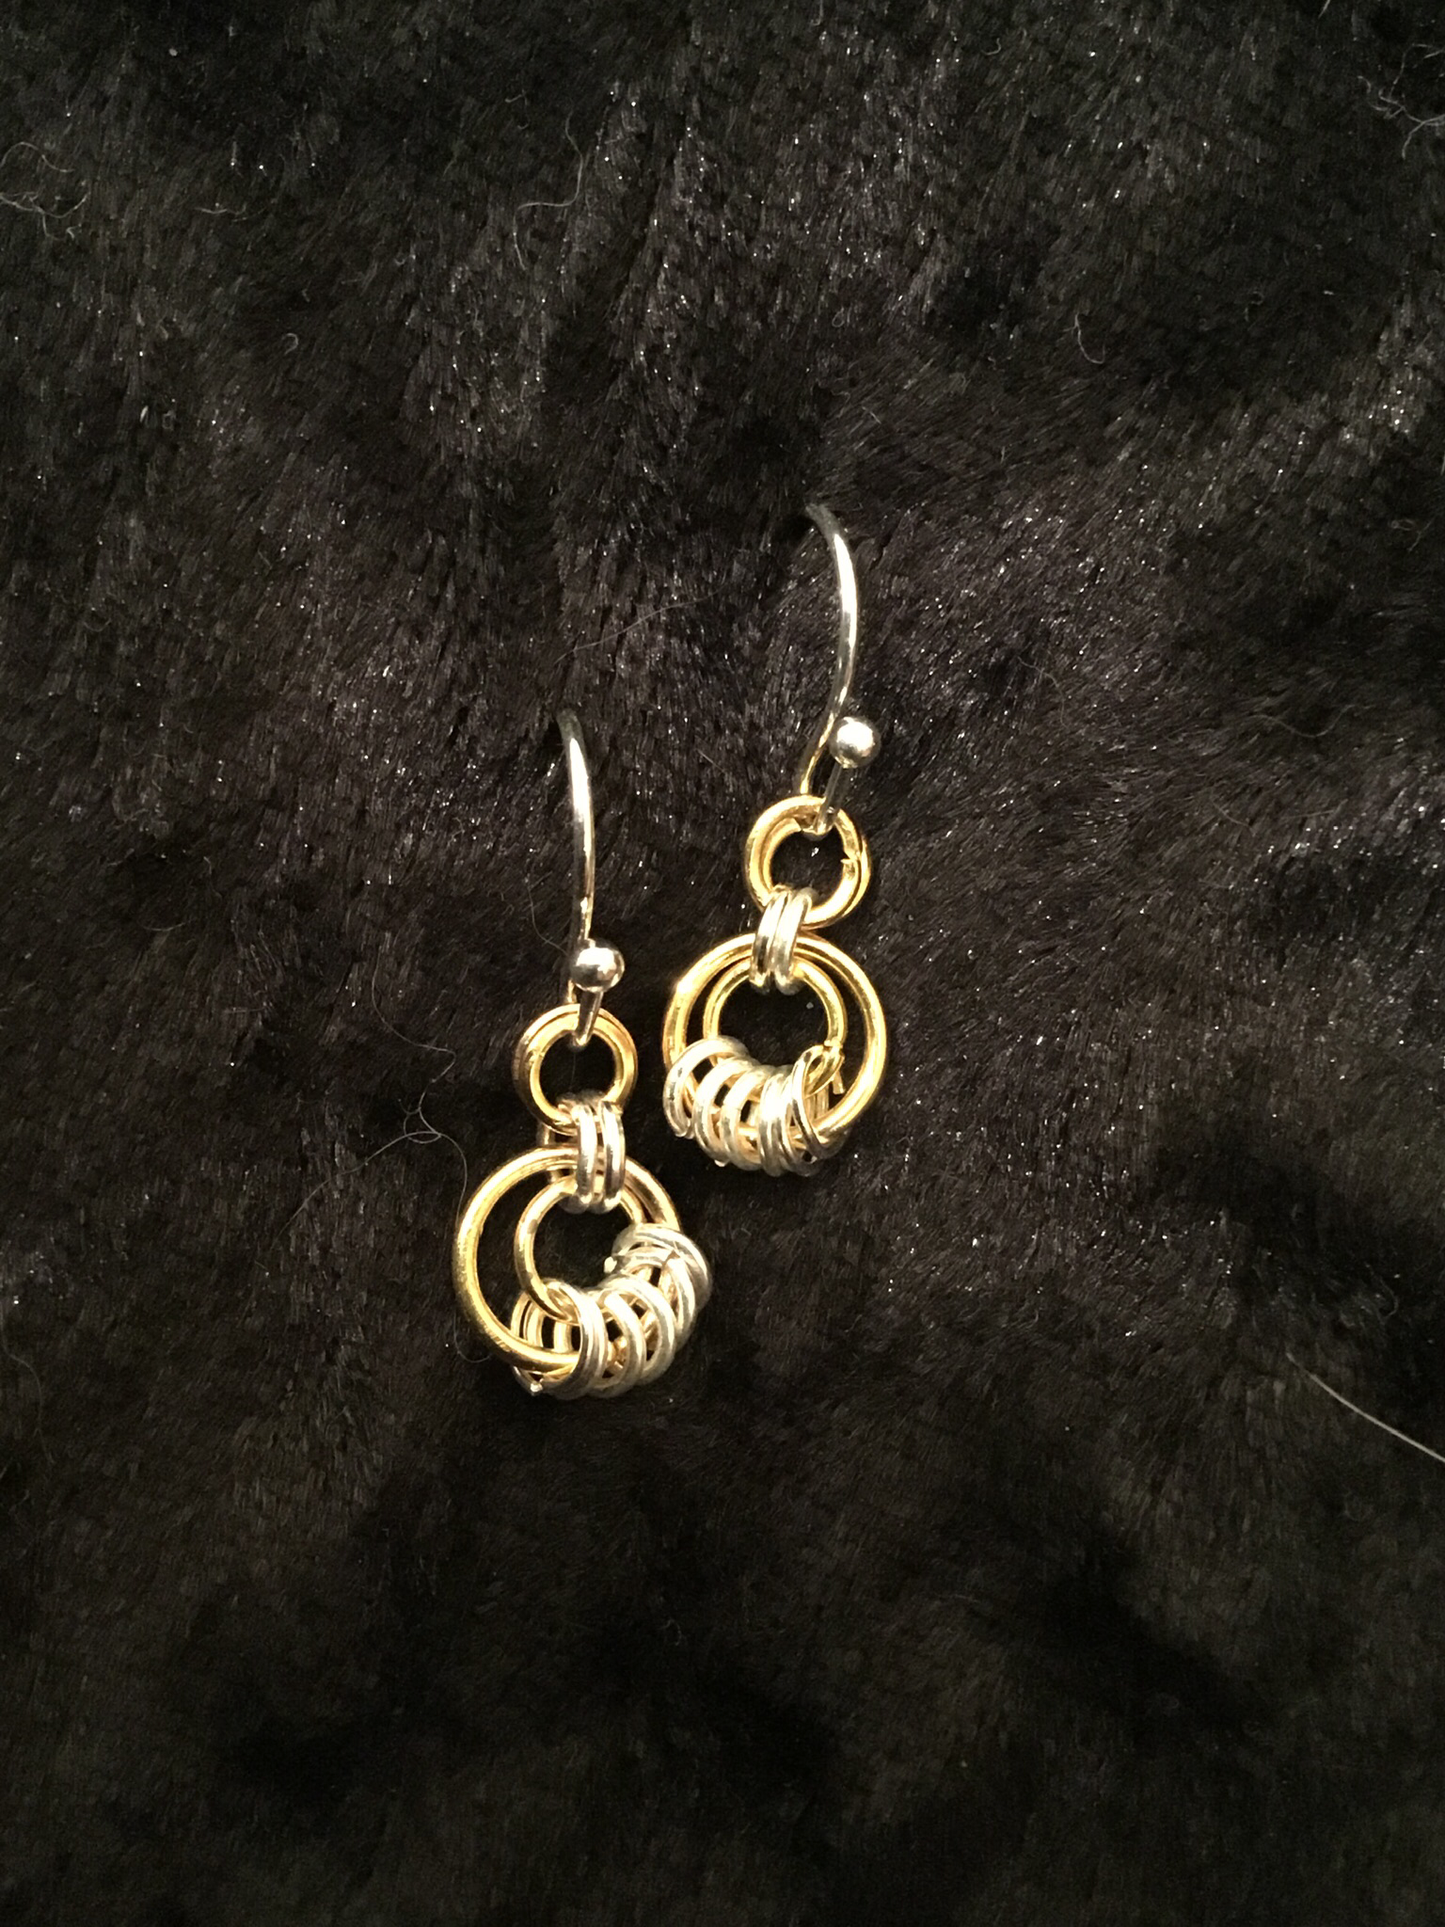 Wire with many silver rings earrings